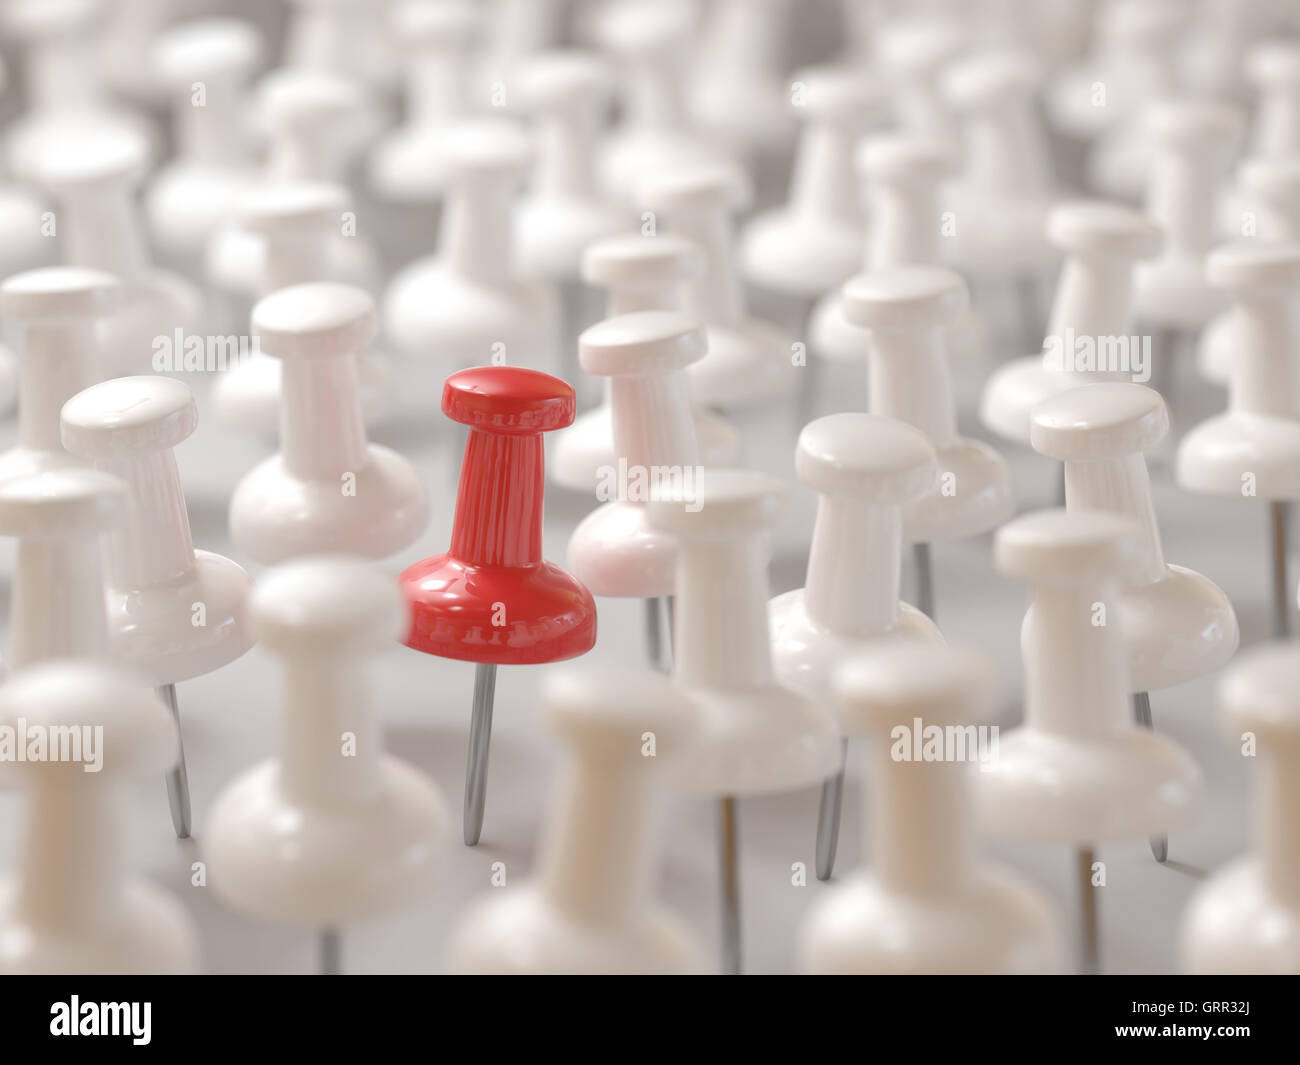 3D illustration. Featured red pin among others all white. Stock Photo